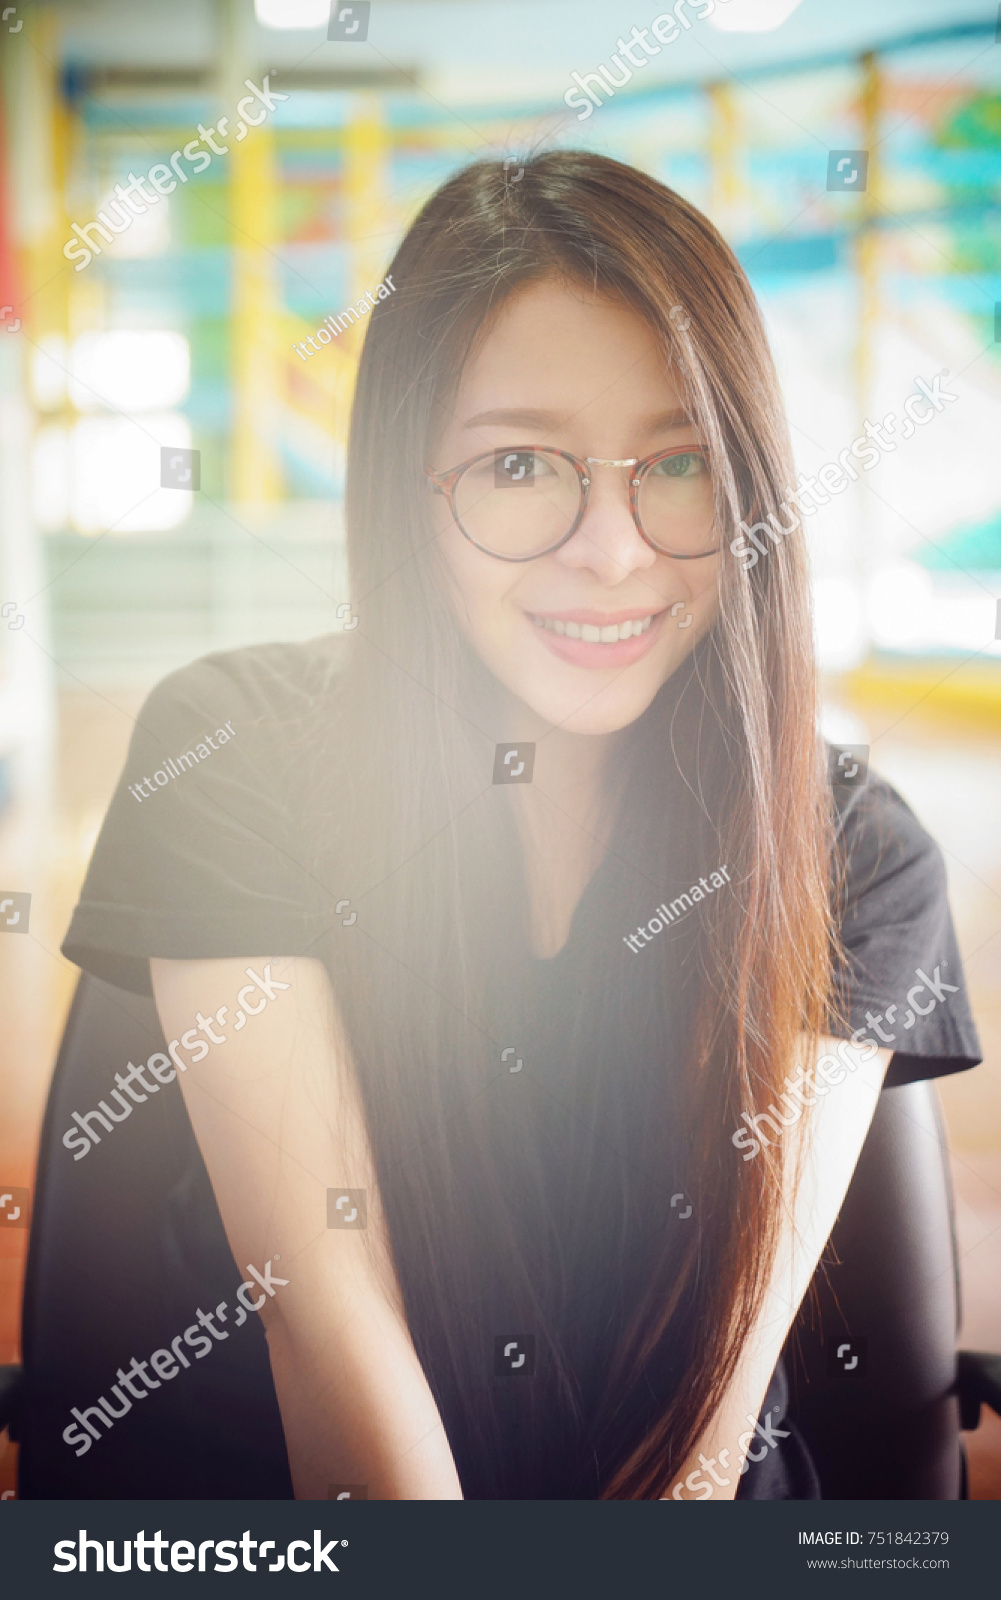 claire stibbon recommends cute asian girl glasses pic